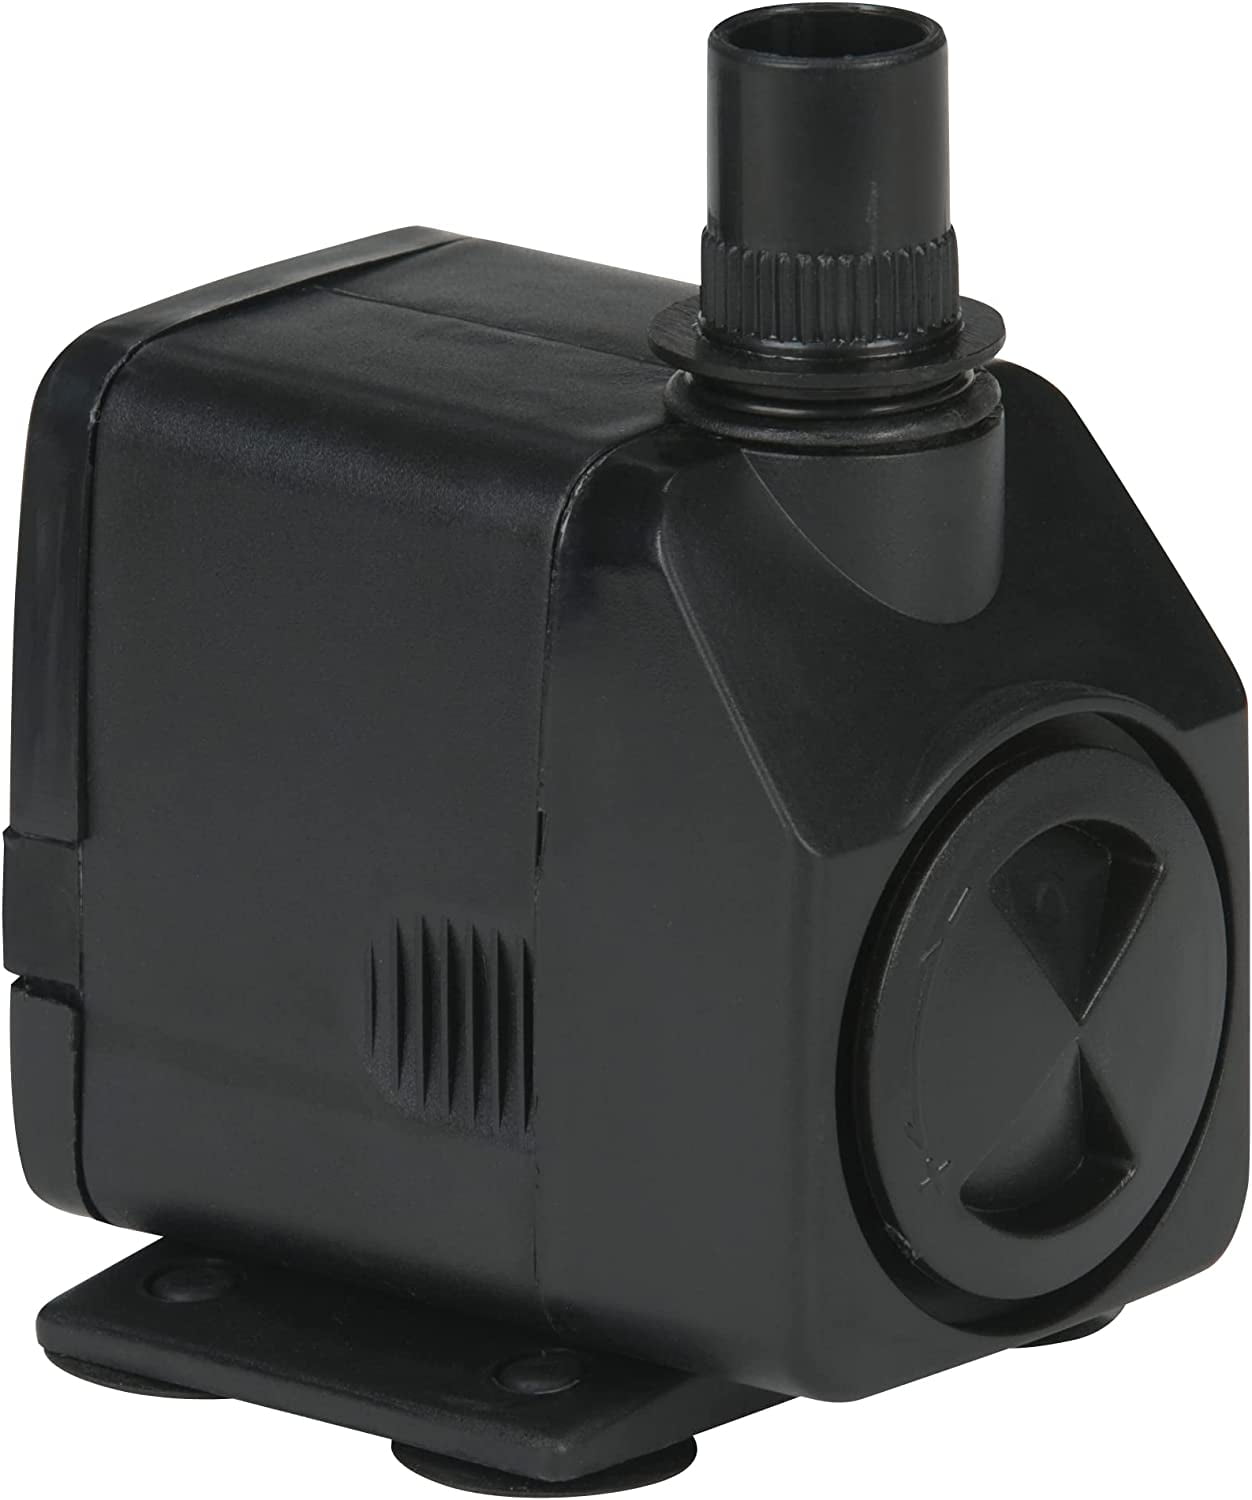  Little Giant #1 115 Volt, 1/150 HP, 205 GPH Direct Drive Small  Submersible Fountain Pump with 6-foot cord, Black, 501004 : Outdoor  Fountain Accessories : Patio, Lawn & Garden